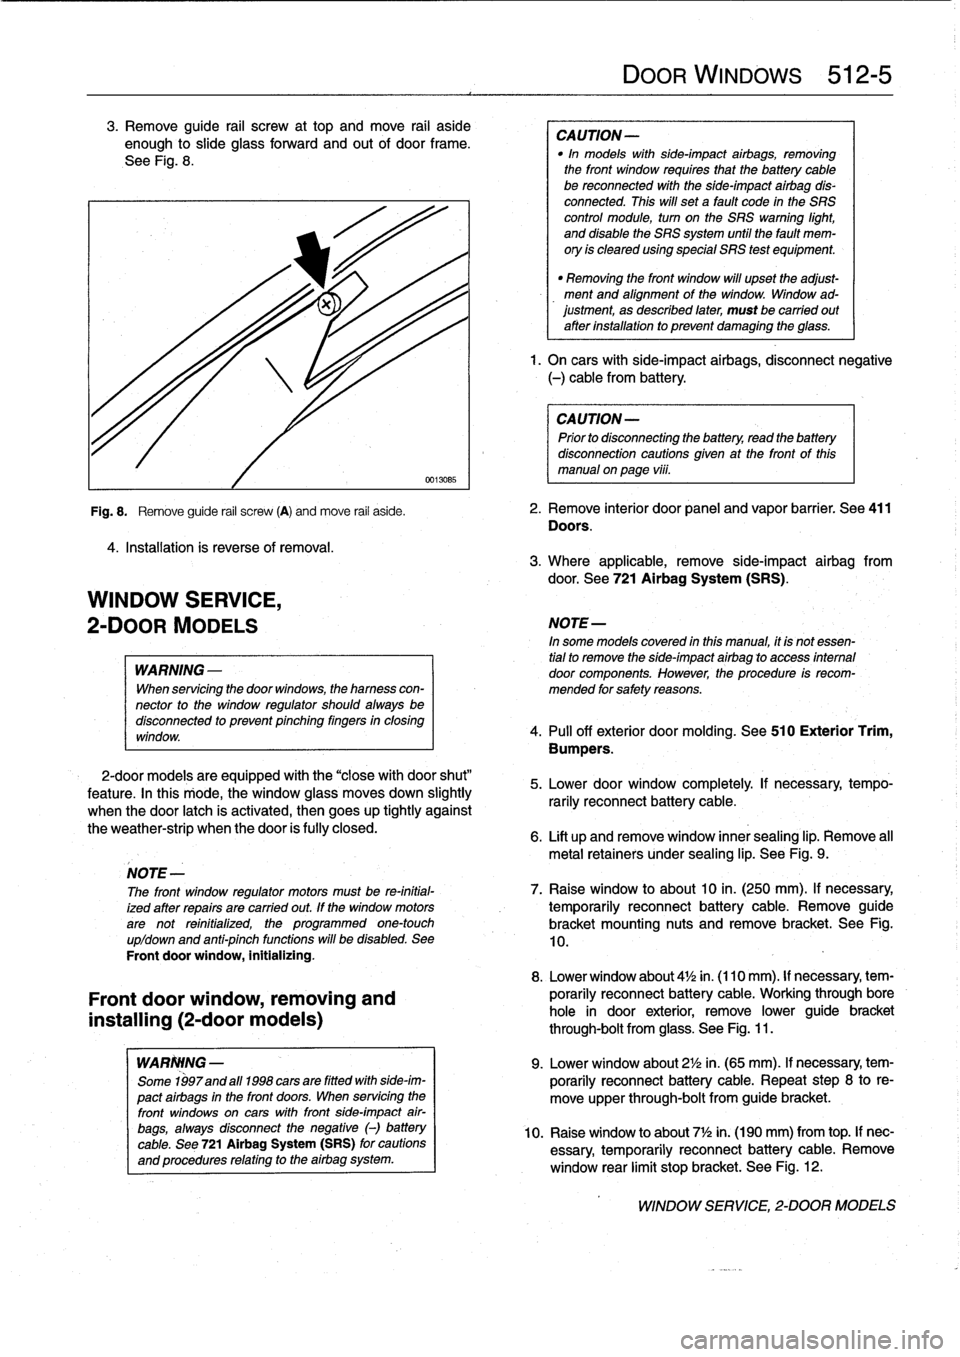 BMW 323i 1992 E36 Workshop Manual 
3
.
Remove
guide
rail
screw
at
top
and
move
rail
aside
enough
to
slide
glass
forward
and
out
of
door
frame
.

See
Fig
.
8
.

4
.
Installation
is
reverse
of
removal
.

WINDOW
SERVICE,

2-DOOR
MODELS

